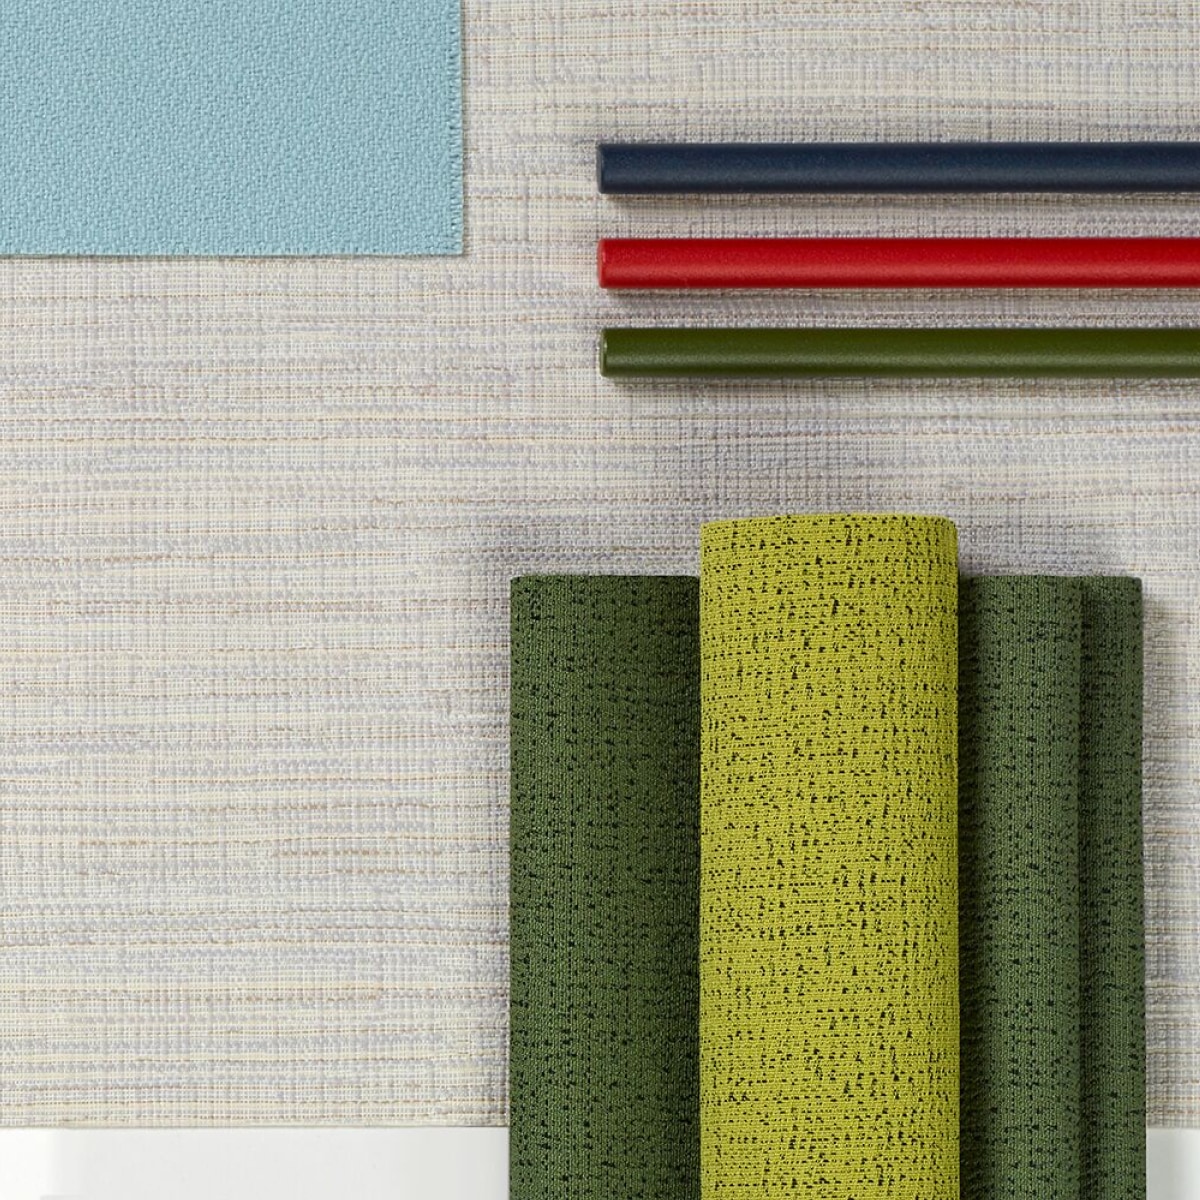 A top view of multiple, folded colorful and neutral fabrics.